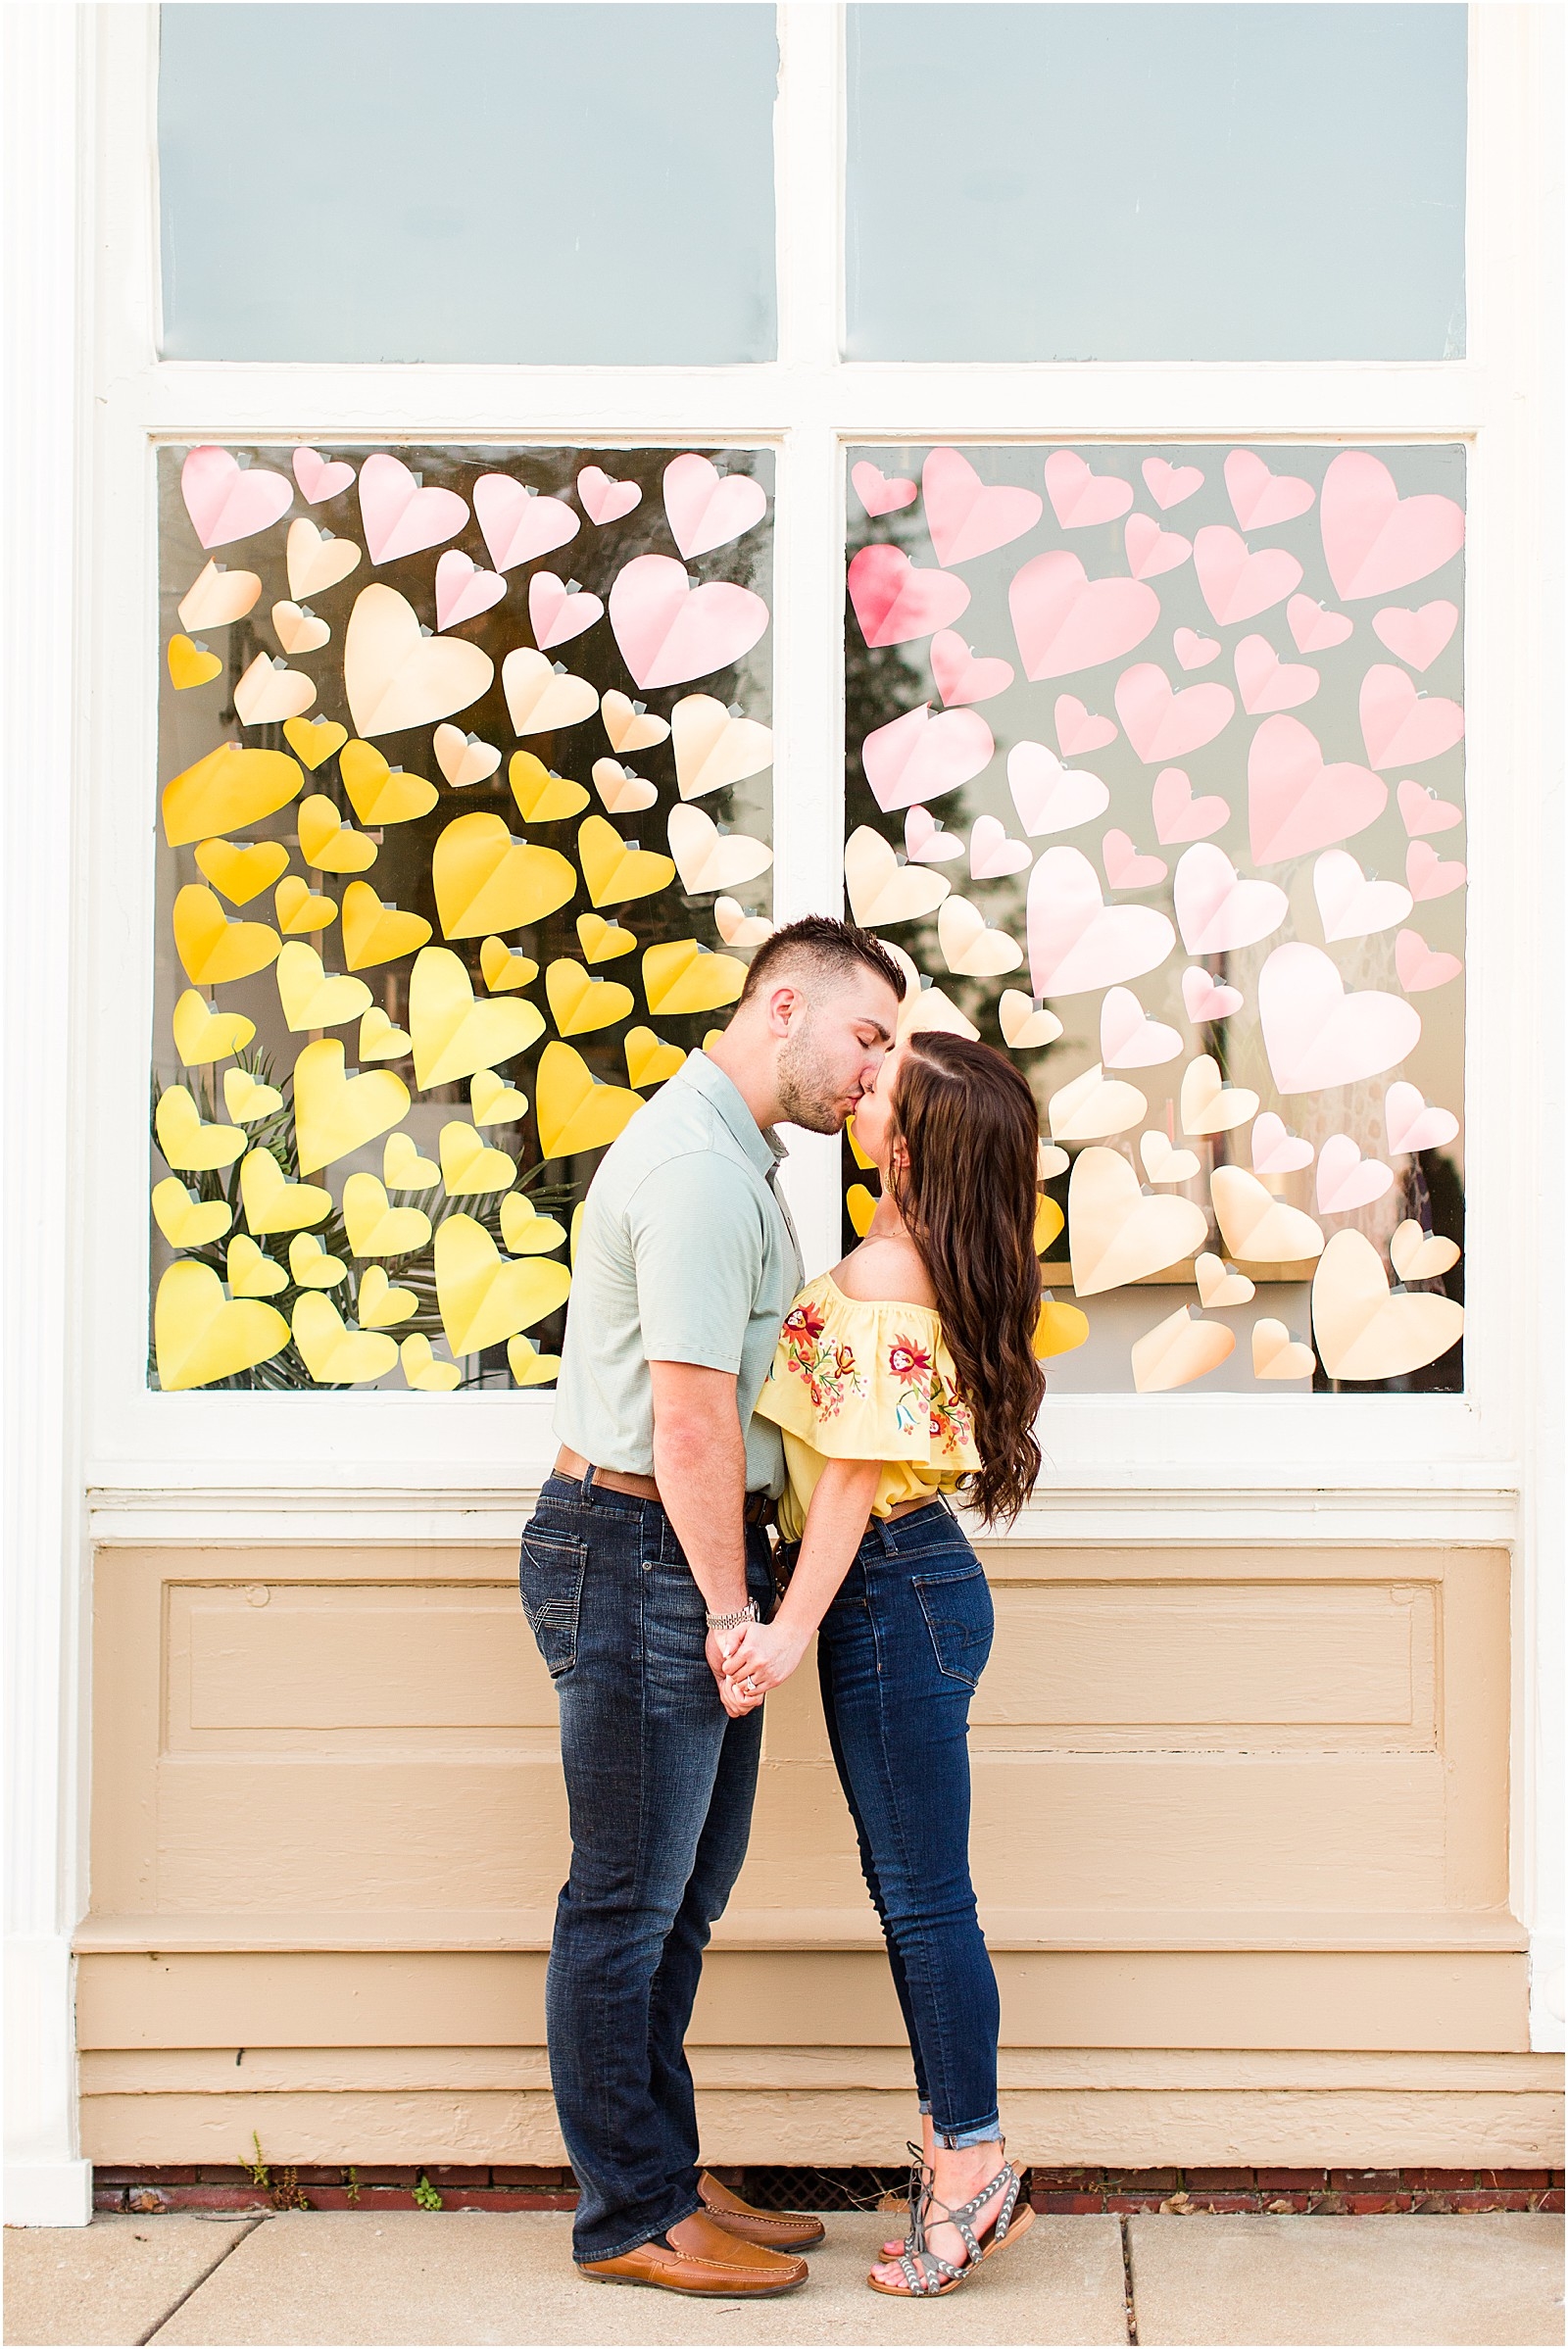 Downtown Newburgh Engagement Session | Matt and Blaire | Bret and Brandie Photography034.jpg